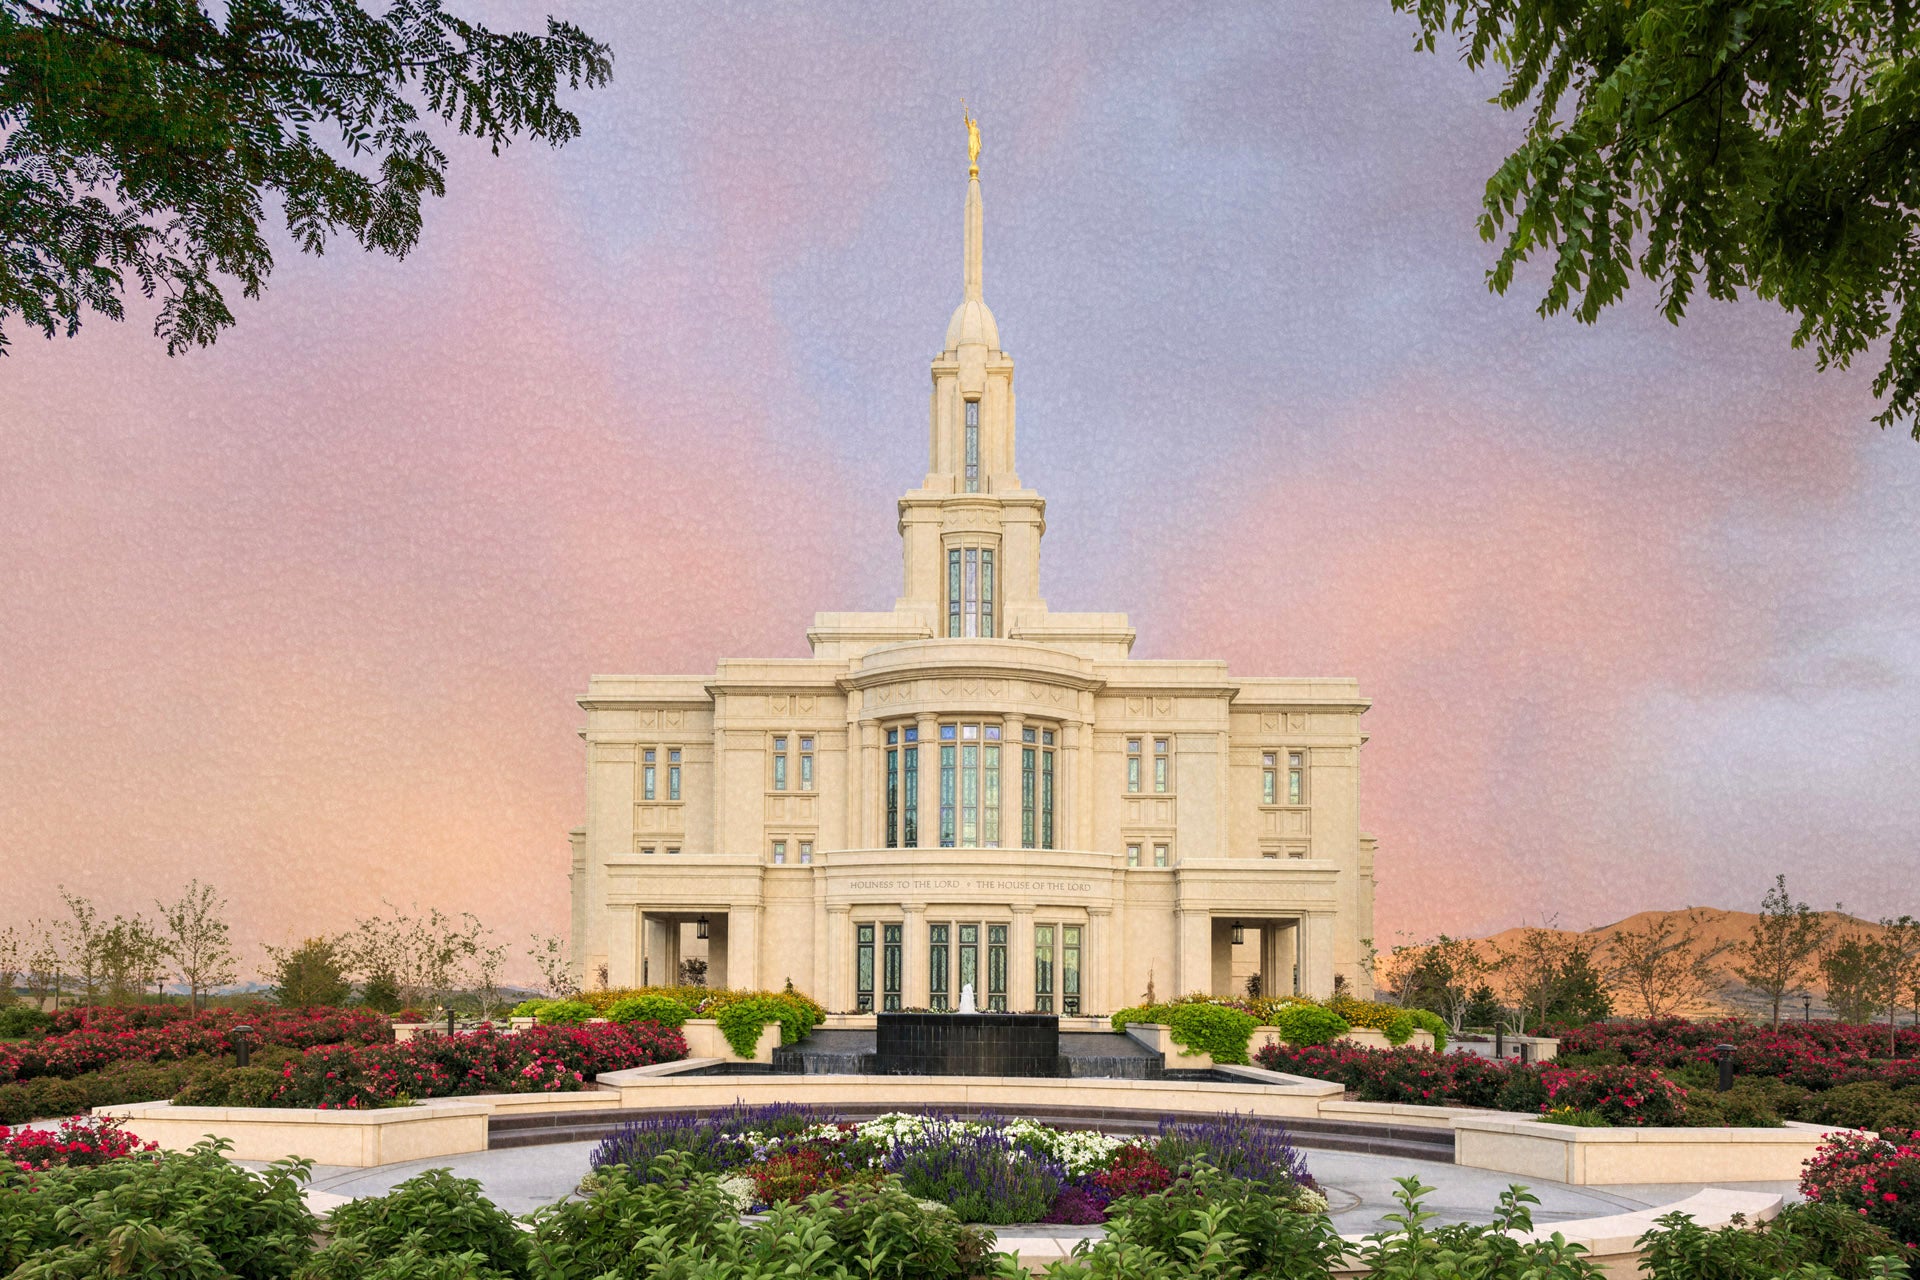 Payson Temple - A House of Peace by Robert A Boyd